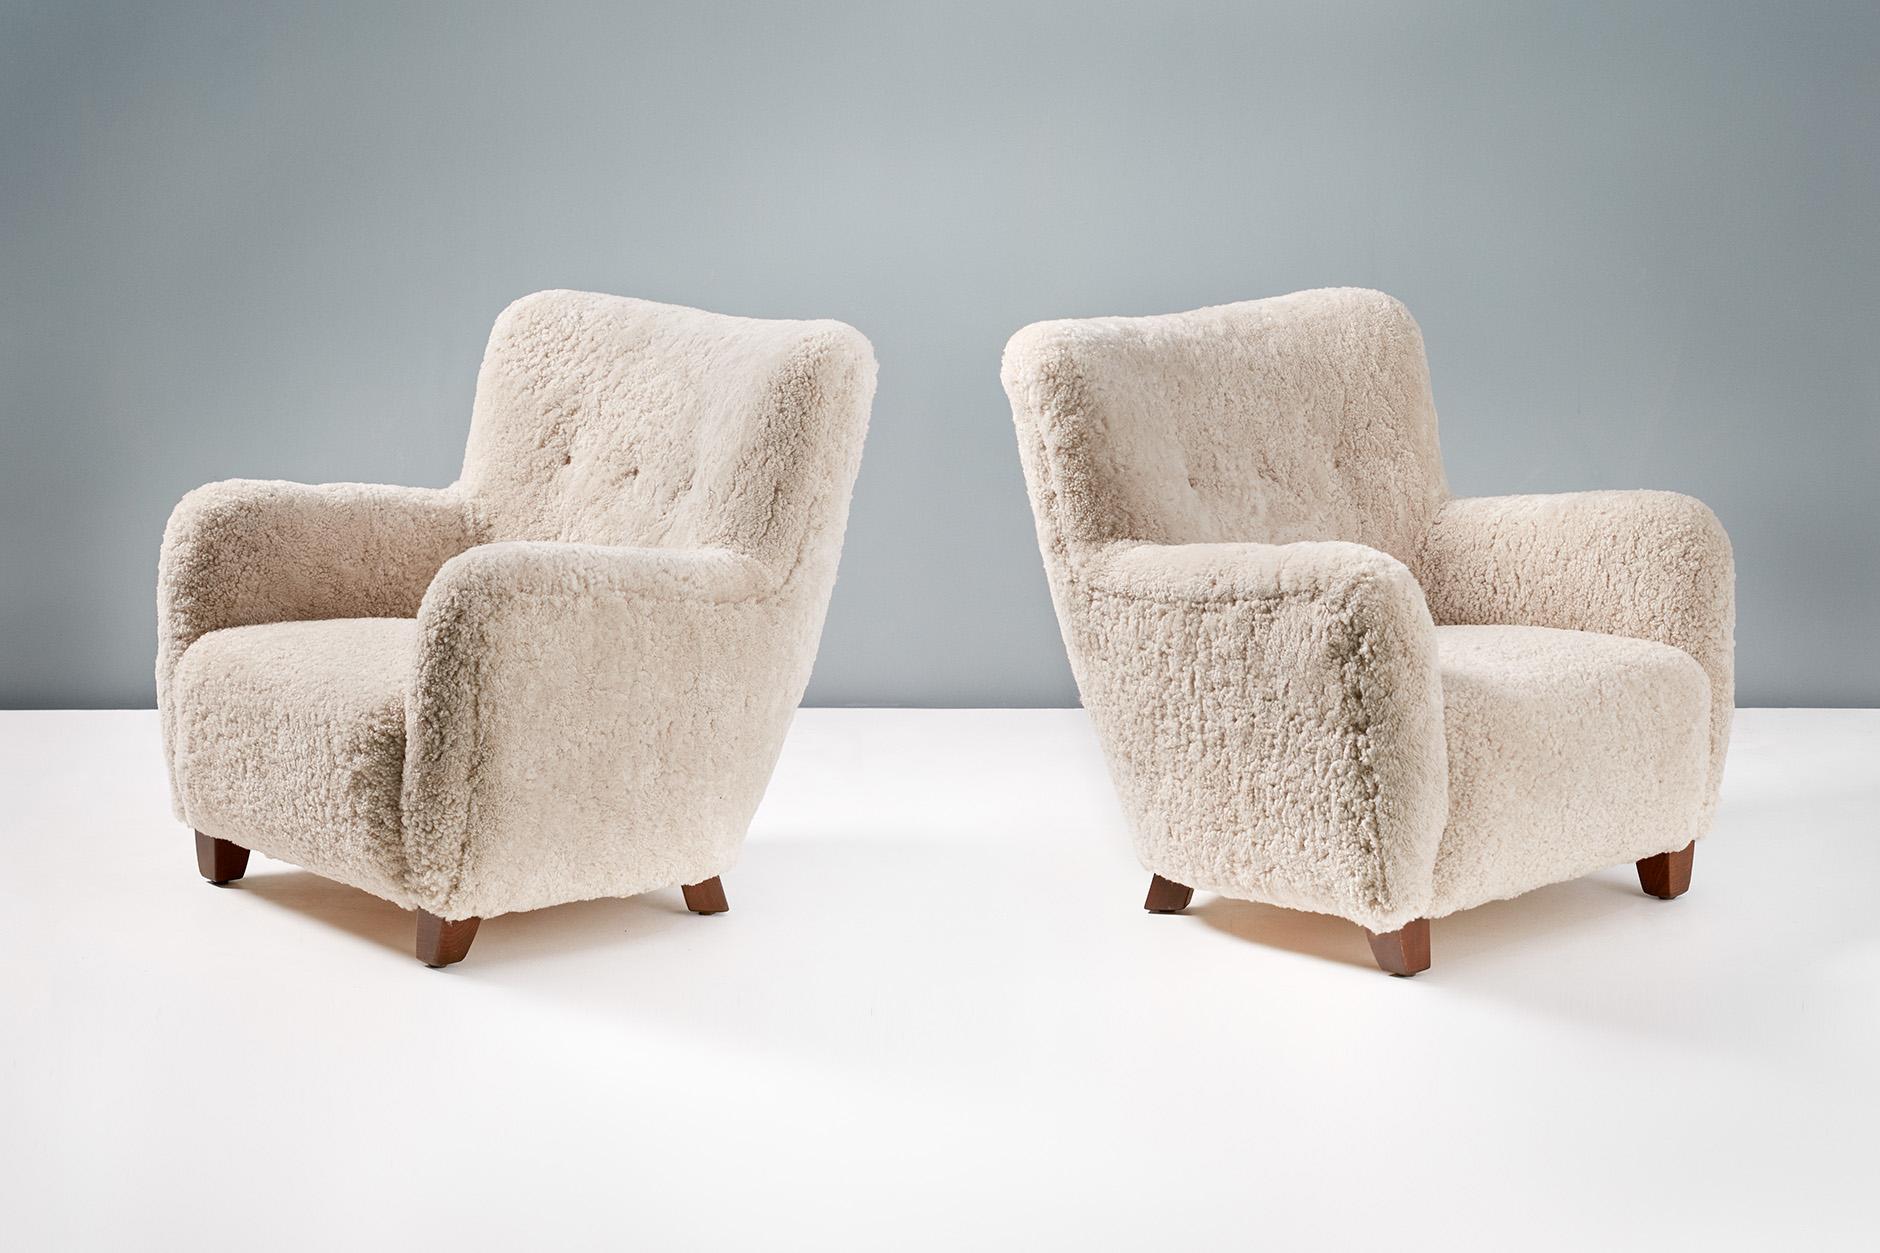 Pair of reproduction armchairs based on a design by FDB Mobler from the 1950s. 

These high-end reproductions are hand-made to order at our workshops in England. The legs are walnut-stained beechwood and the chairs have are upholstered in